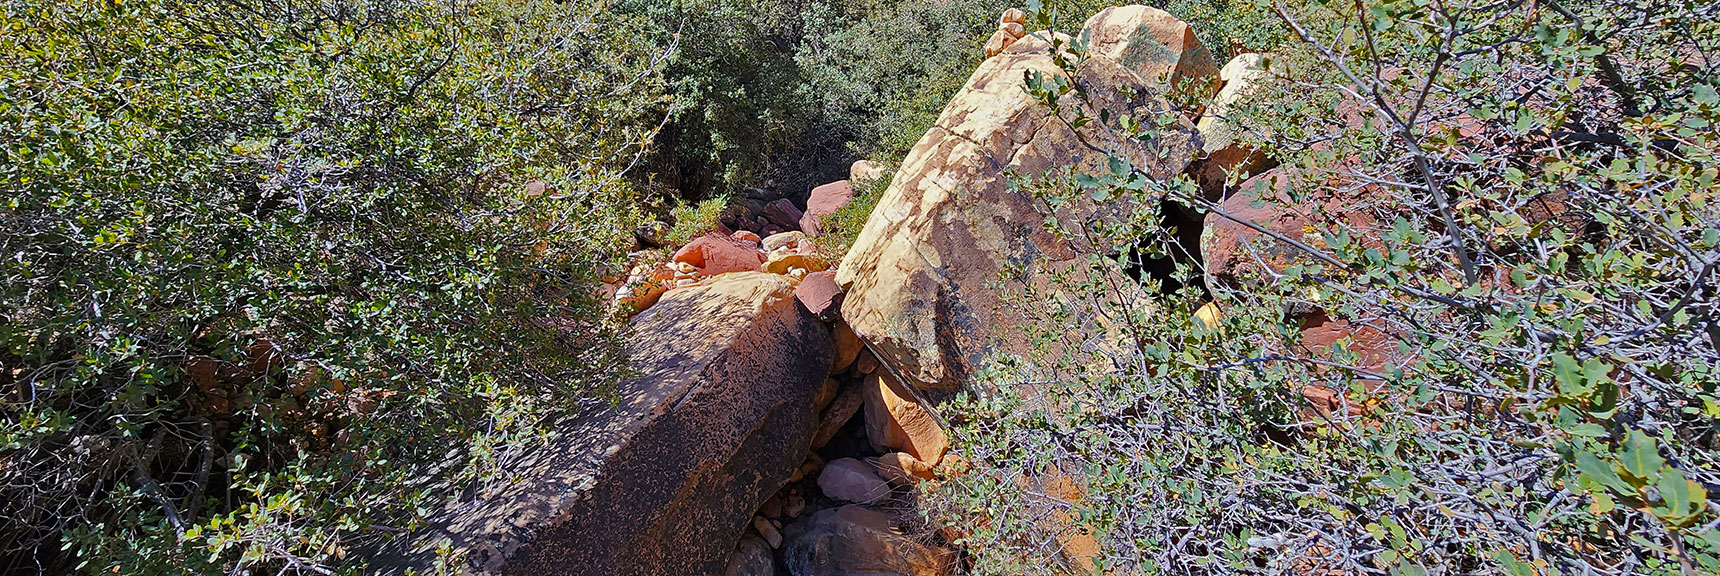 Descend Again into Thicker Brush & Boulders in Canyon. Follow Cairns. | Juniper Canyon | Red Rock Canyon National Conservation Area, Nevada | David Smith | LasVegasAreaTrails.com